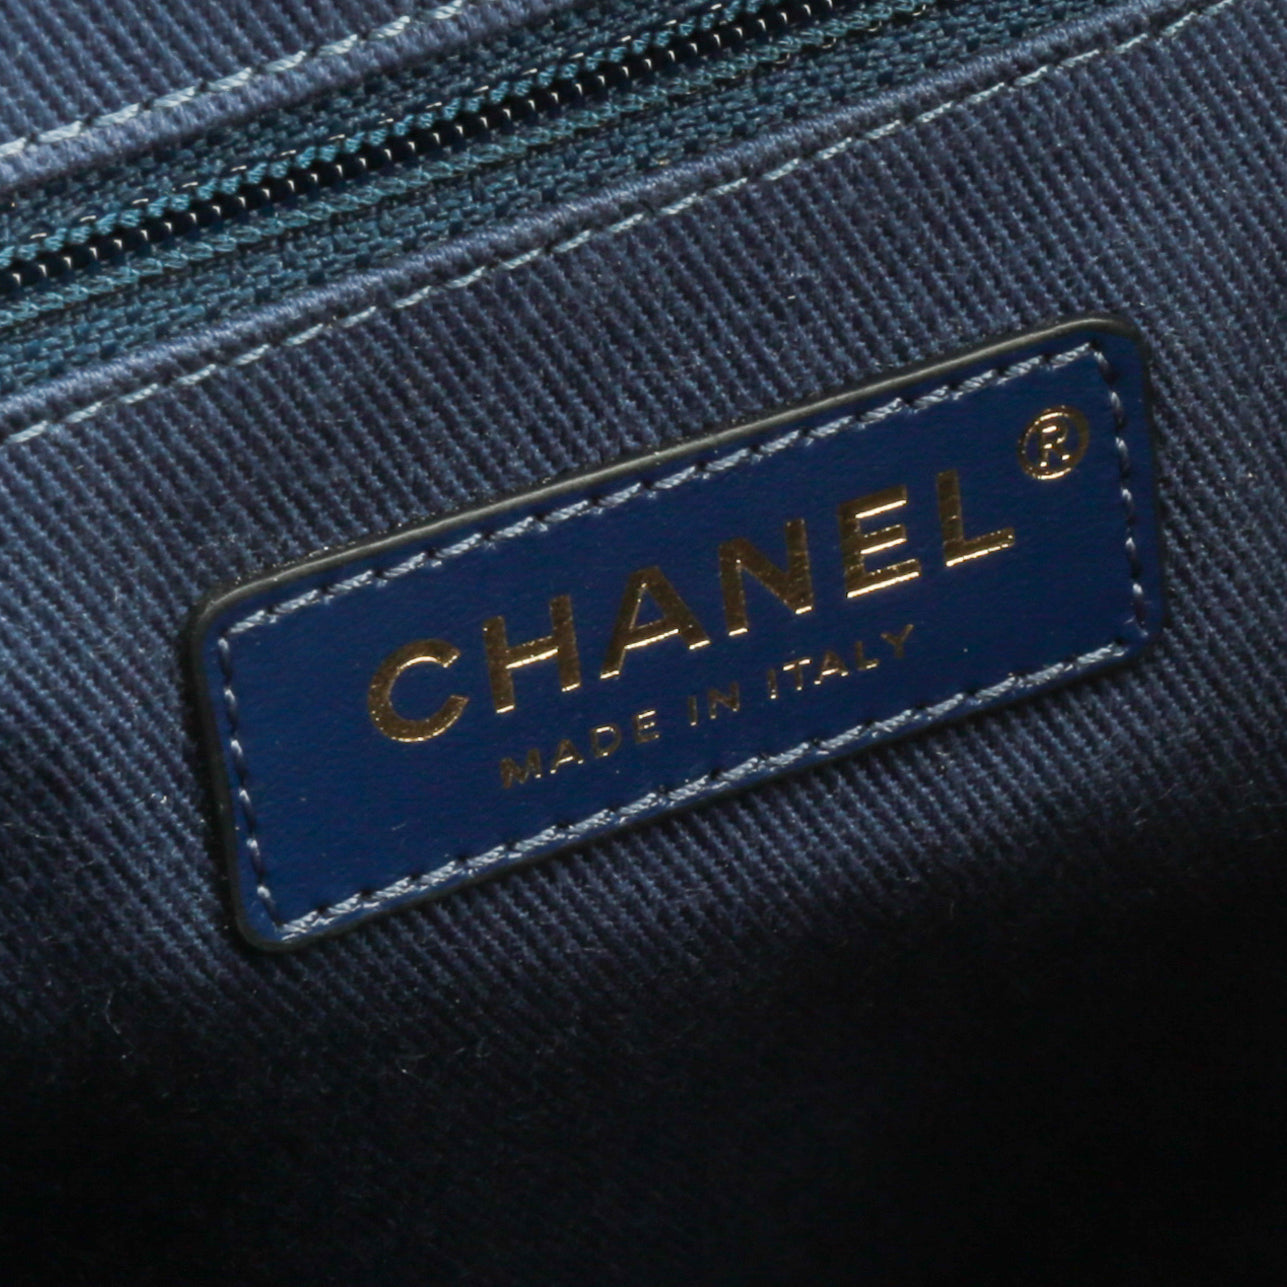 CHANEL Small Deauville Shopping Tote - Blue